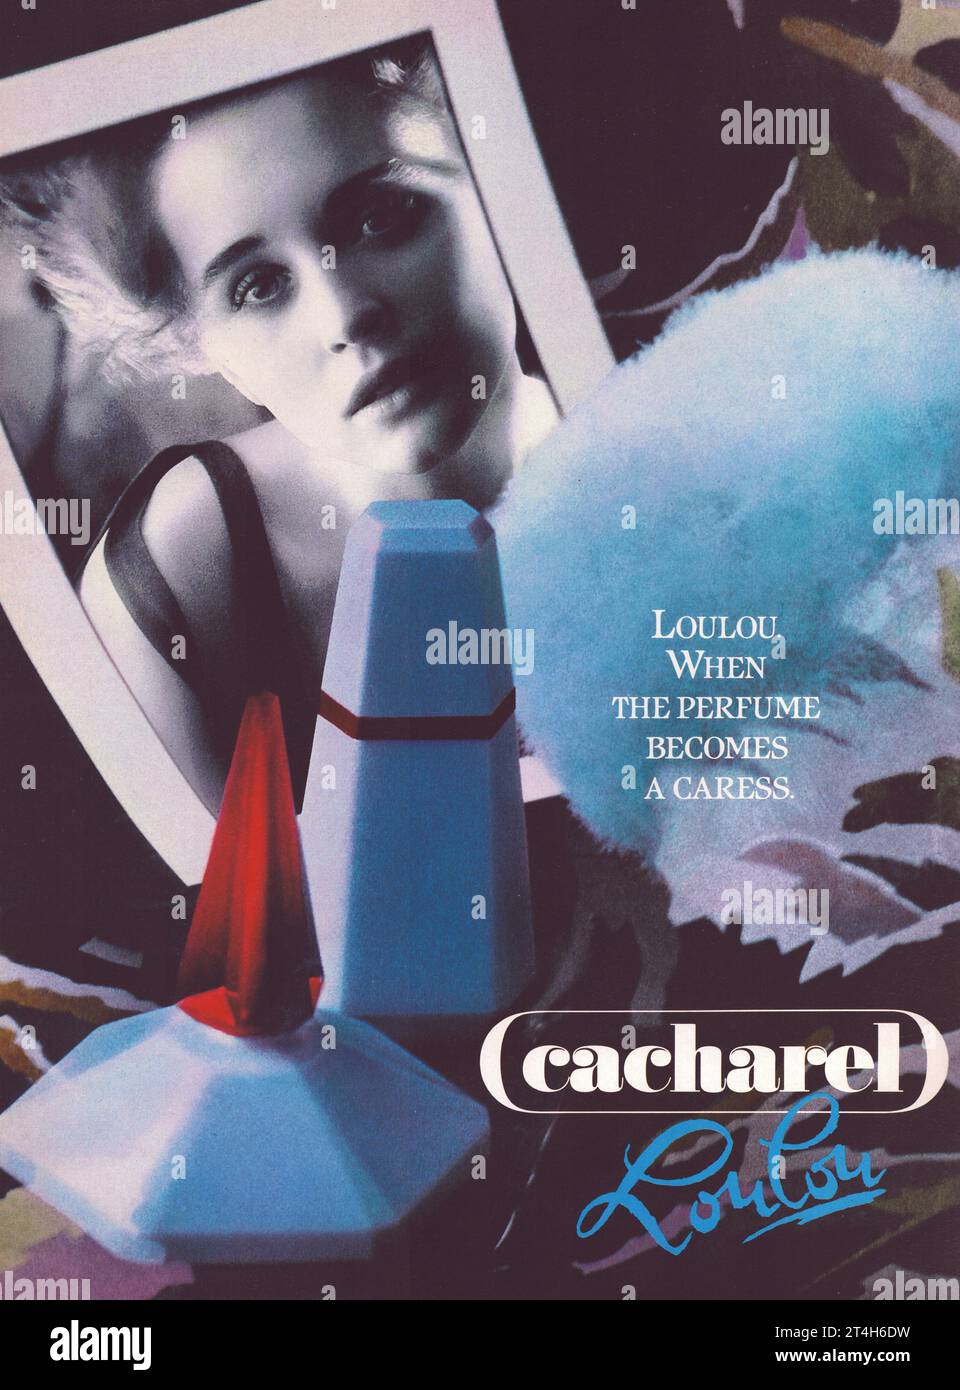 Cacharel Loulou Perfume Advertising poster Cacharel commercial  When the perfume becomes a caress. Cacharel Loulou blue perfume bottle Stock Photo